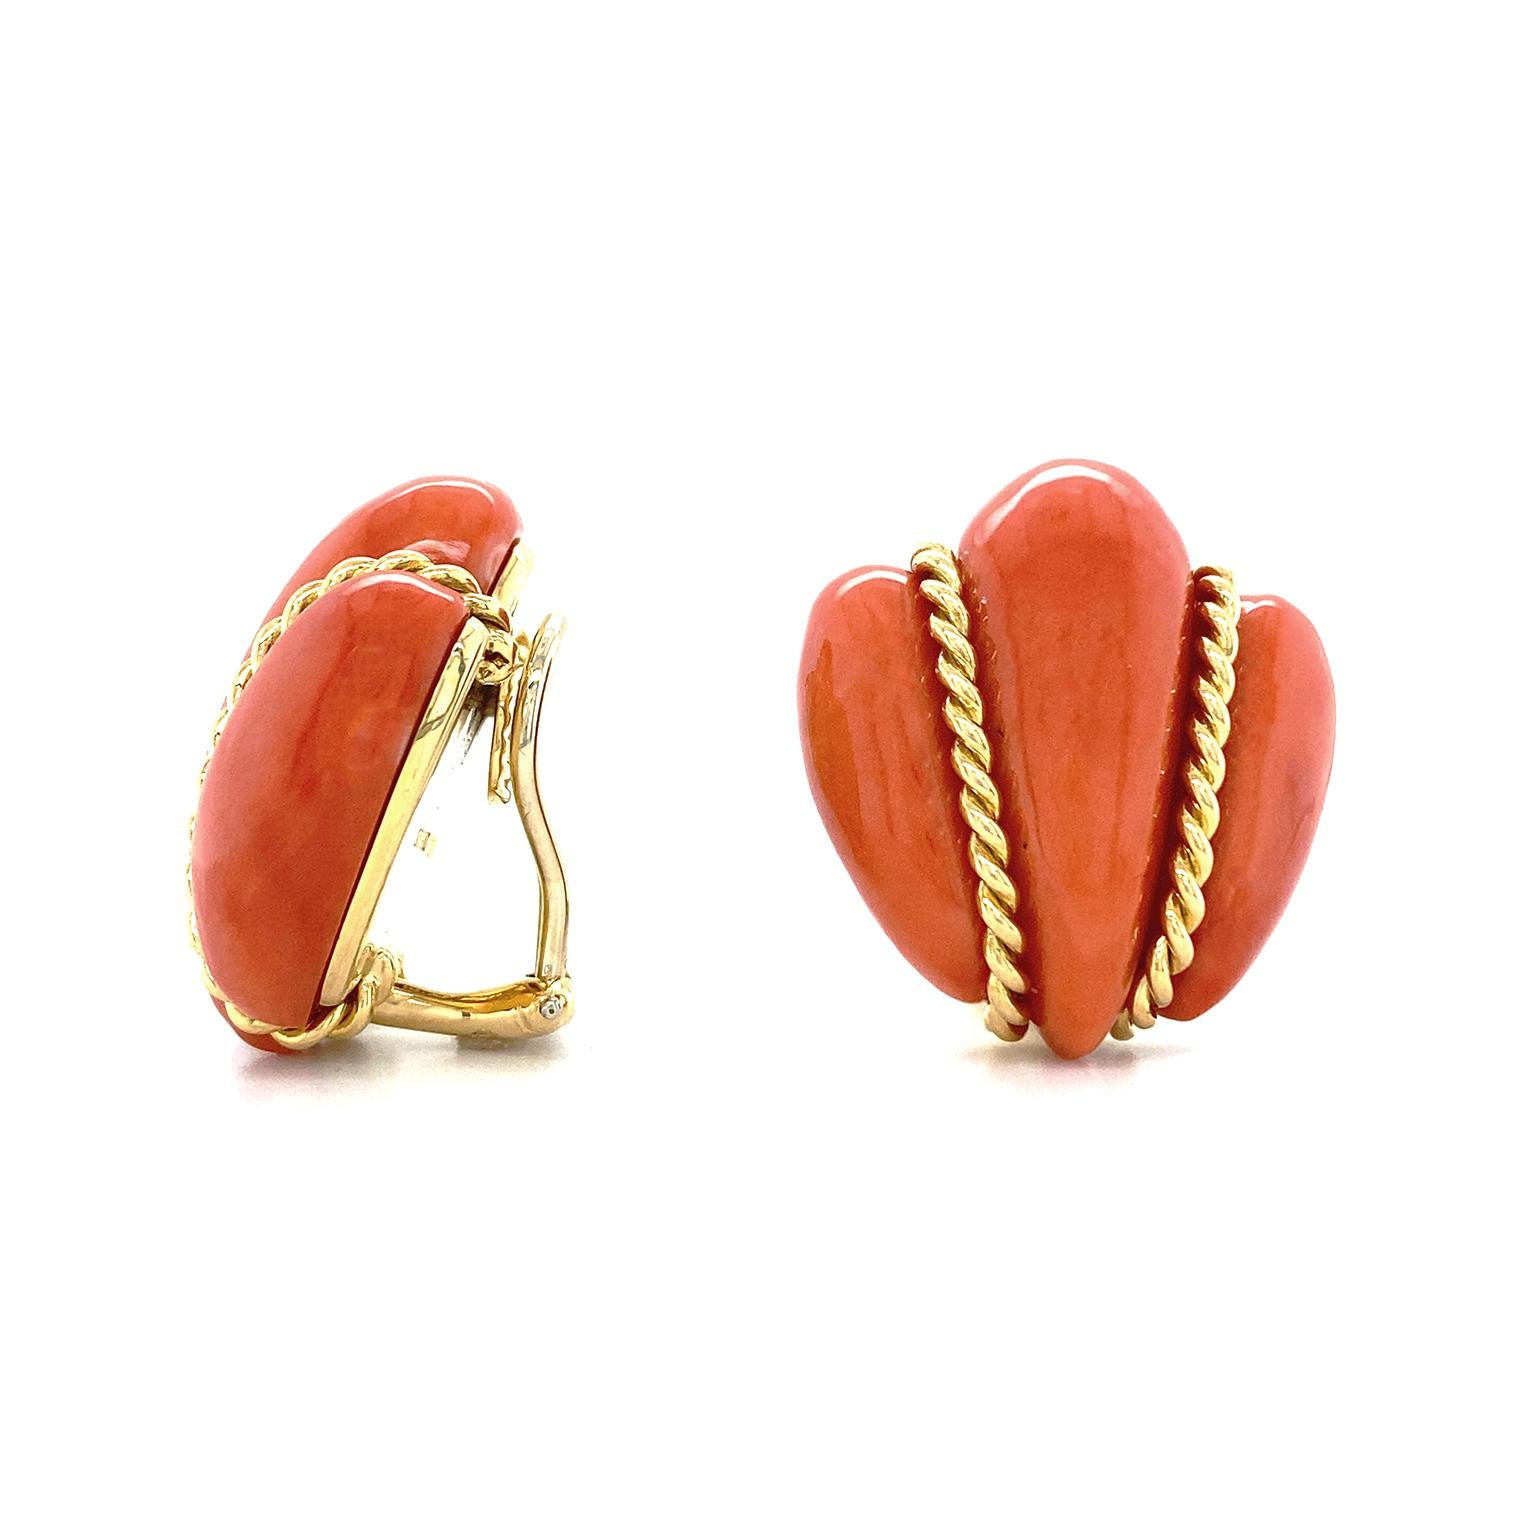 Vibrancy of red orange coral is showcased in these earrings. The repurposed gem is carved into a tapered shape with a trio of rounded tips. The center is raised higher and 18k yellow gold braids rest along each side of it. This forms an illusion of